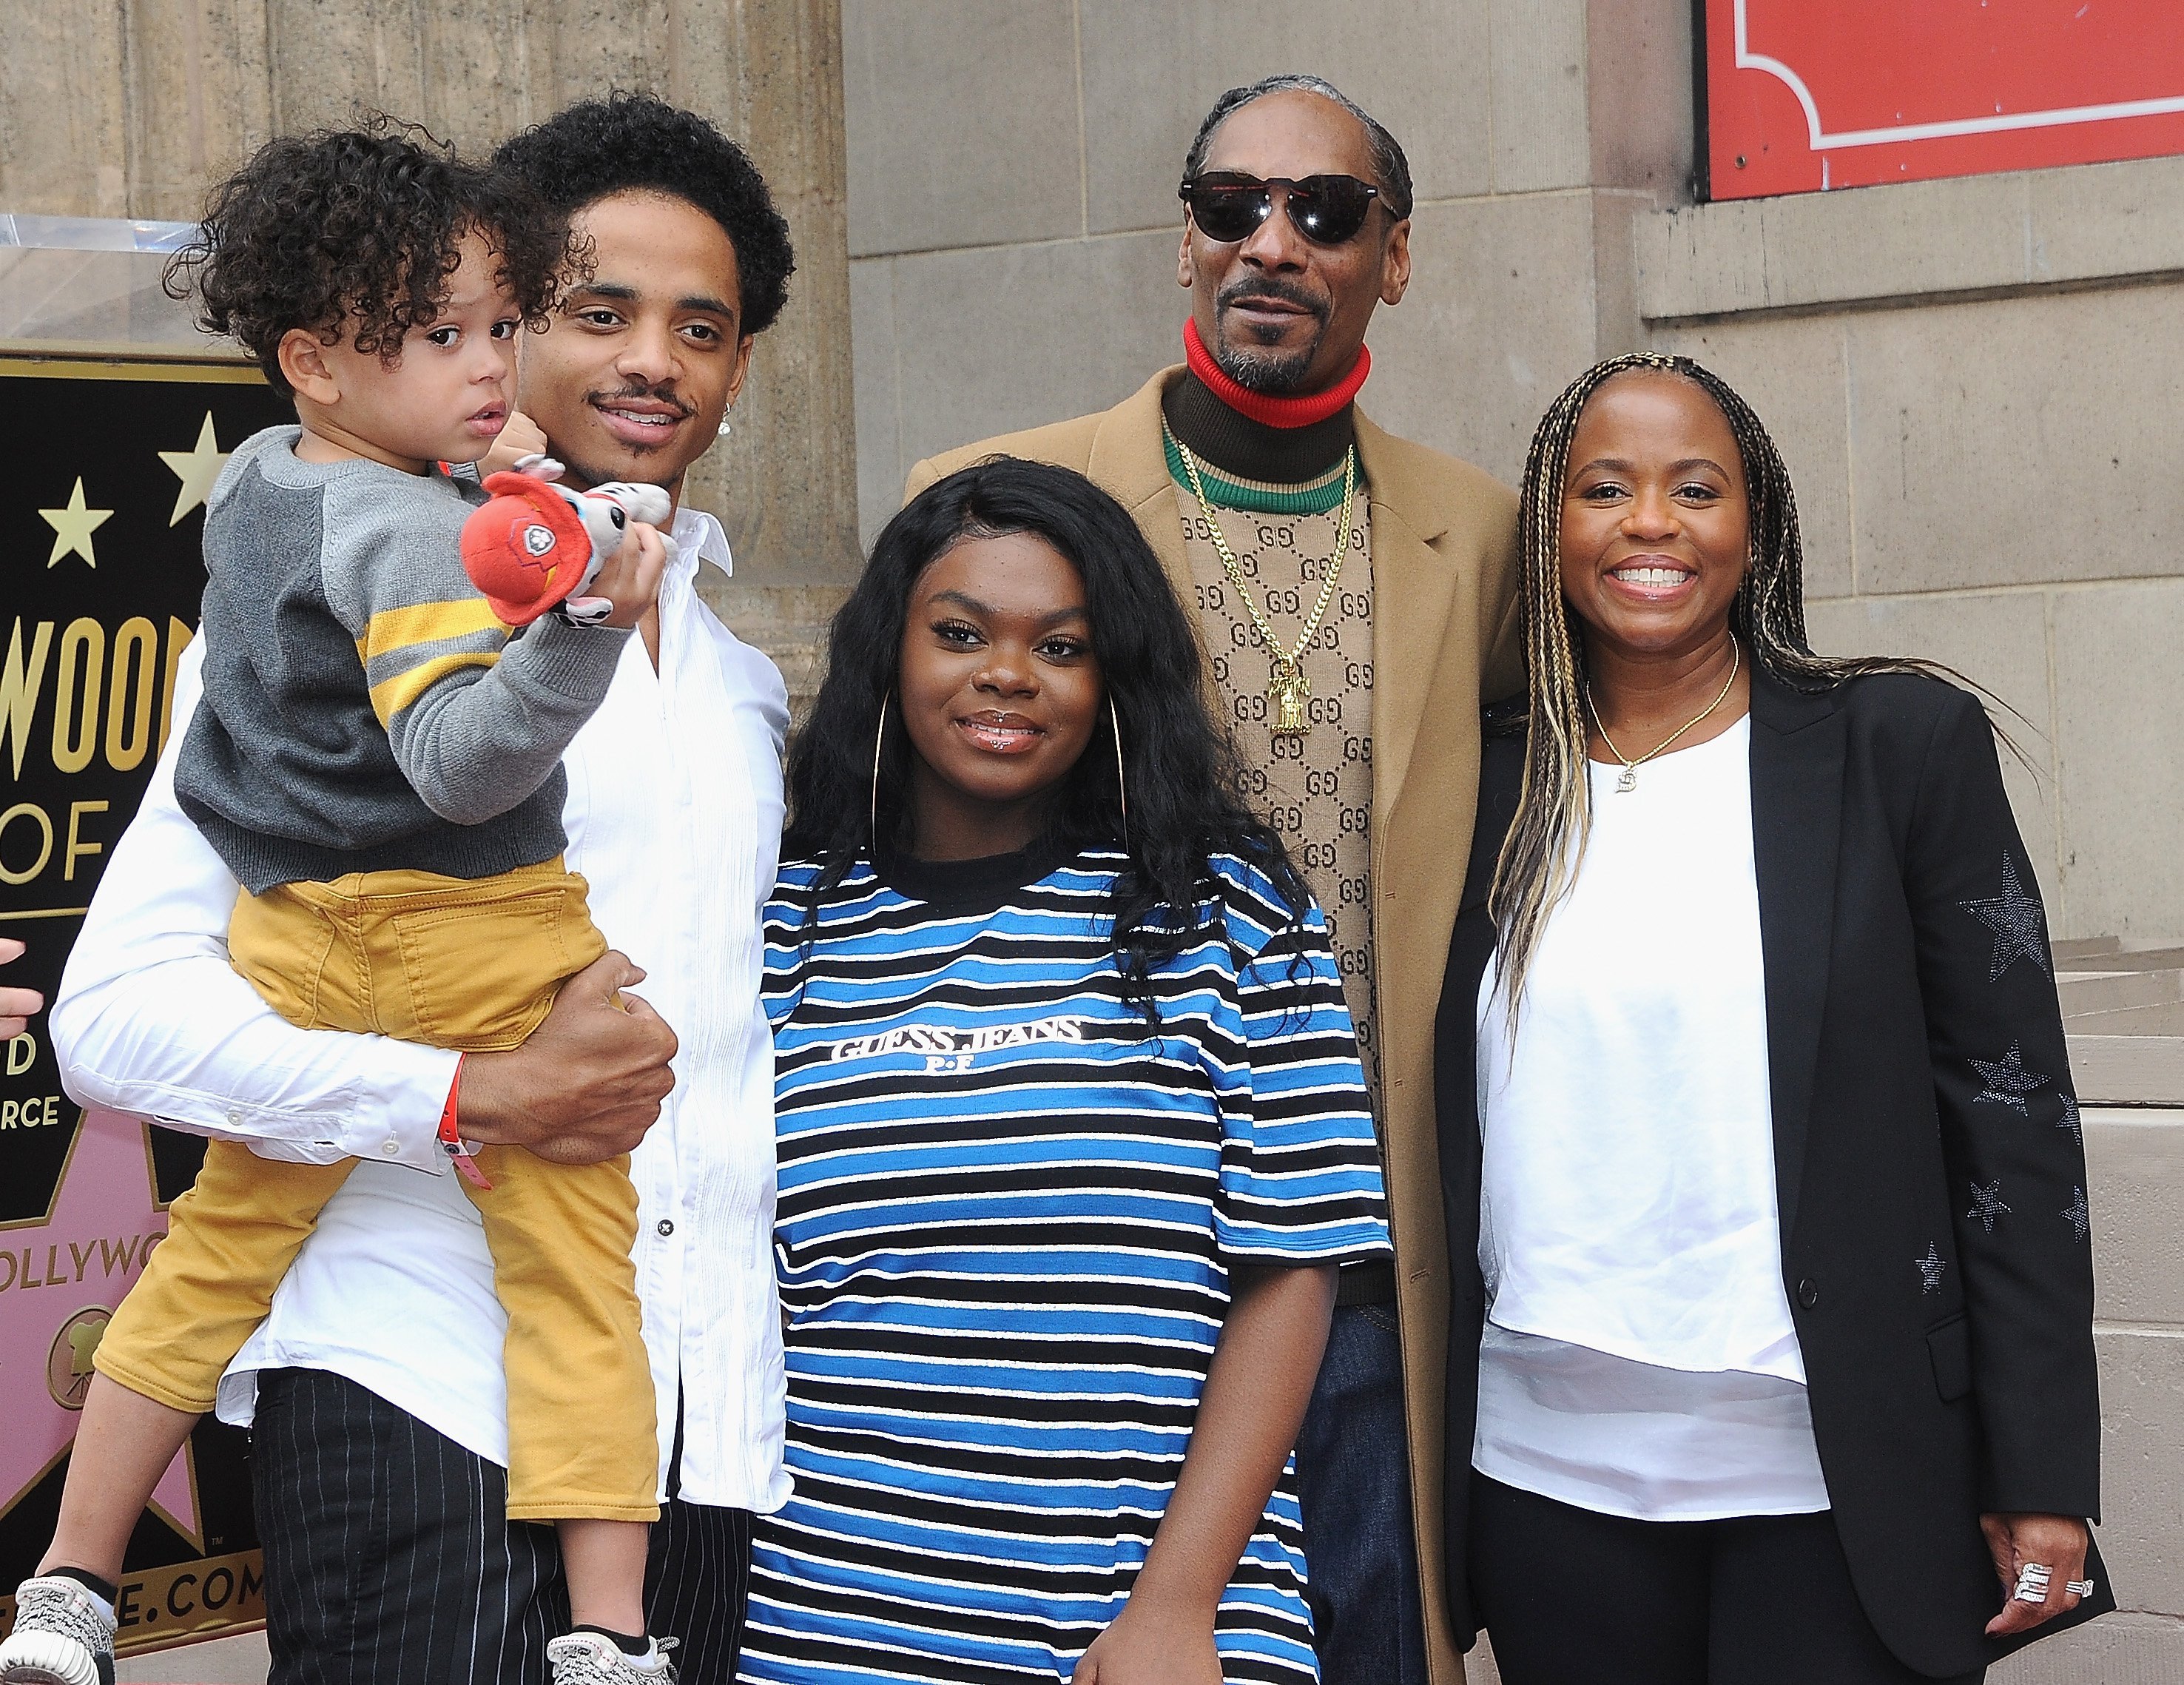 Snoop Dogg & family at Snoop Dogg's star ceremony on The Hollywood Walk of Fame on Nov. 19, 2018 | Photo: Getty Images